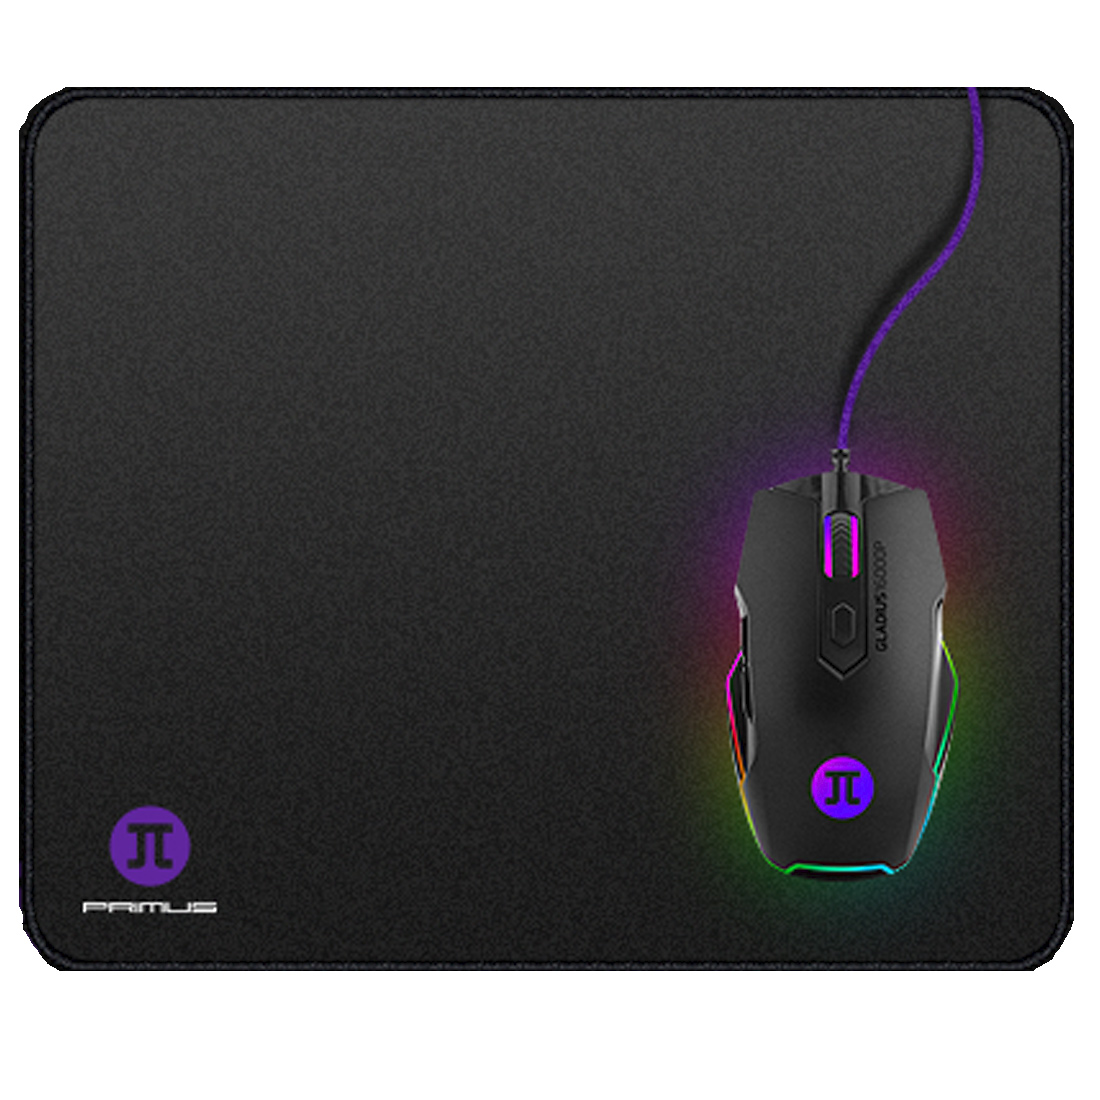 Mouse Pad Gamer PRIMUS Mediano PMP-01M